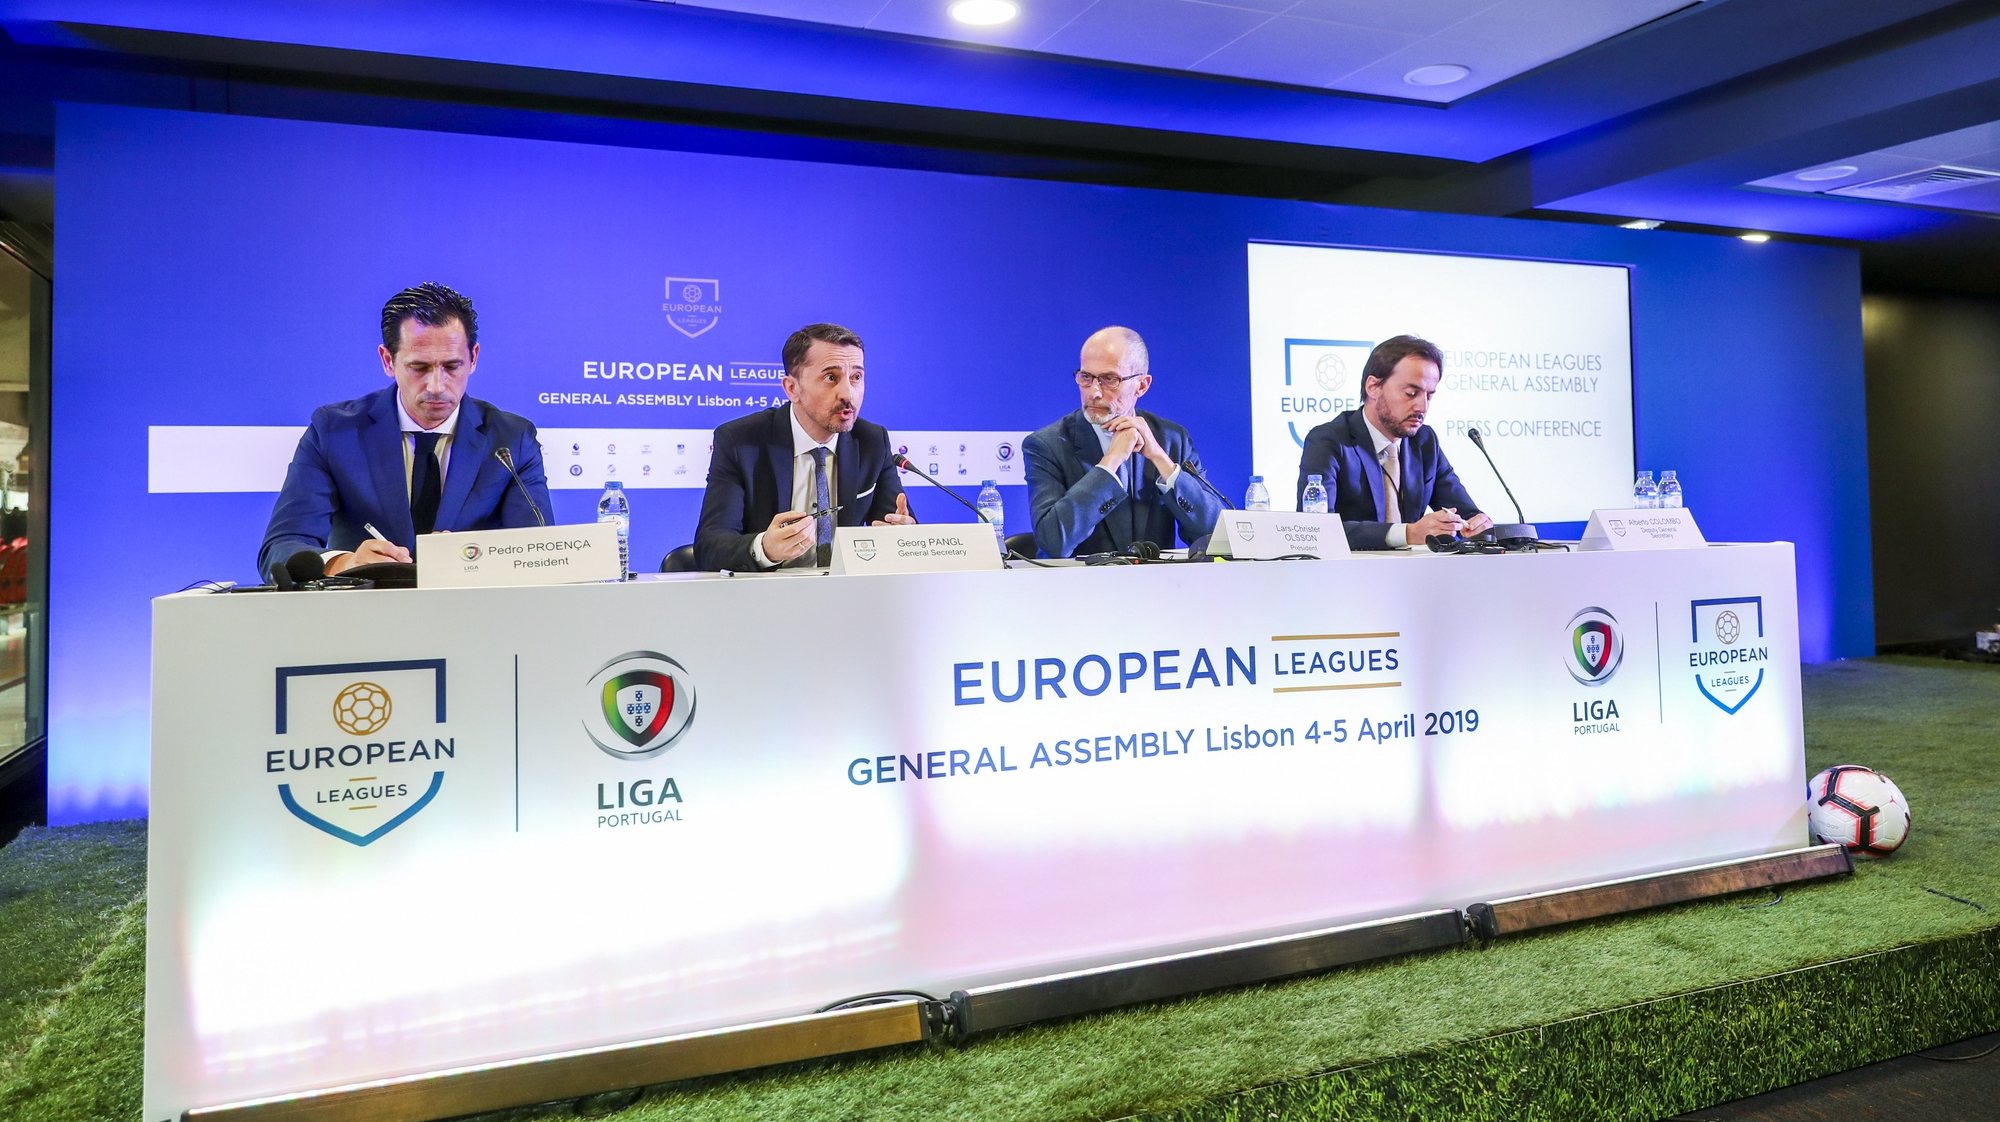 epa07486577 The President of the European Leagues General Leagues (ELGL) Lars-Christer Olsson (2-R), the Secretary-General of the ELGL Georg Pangl (2-L), the President of the Portuguese Soccer League Pedro Proenca (L), and the Deputy Secretary-General of the ELGL Alberto Colombo (R) attend a press conference after the European Leagues General Assembly at Luz Stadium in Lisbon, Portugal, 05 April 2019.  EPA/JOSE SENA GOULAO